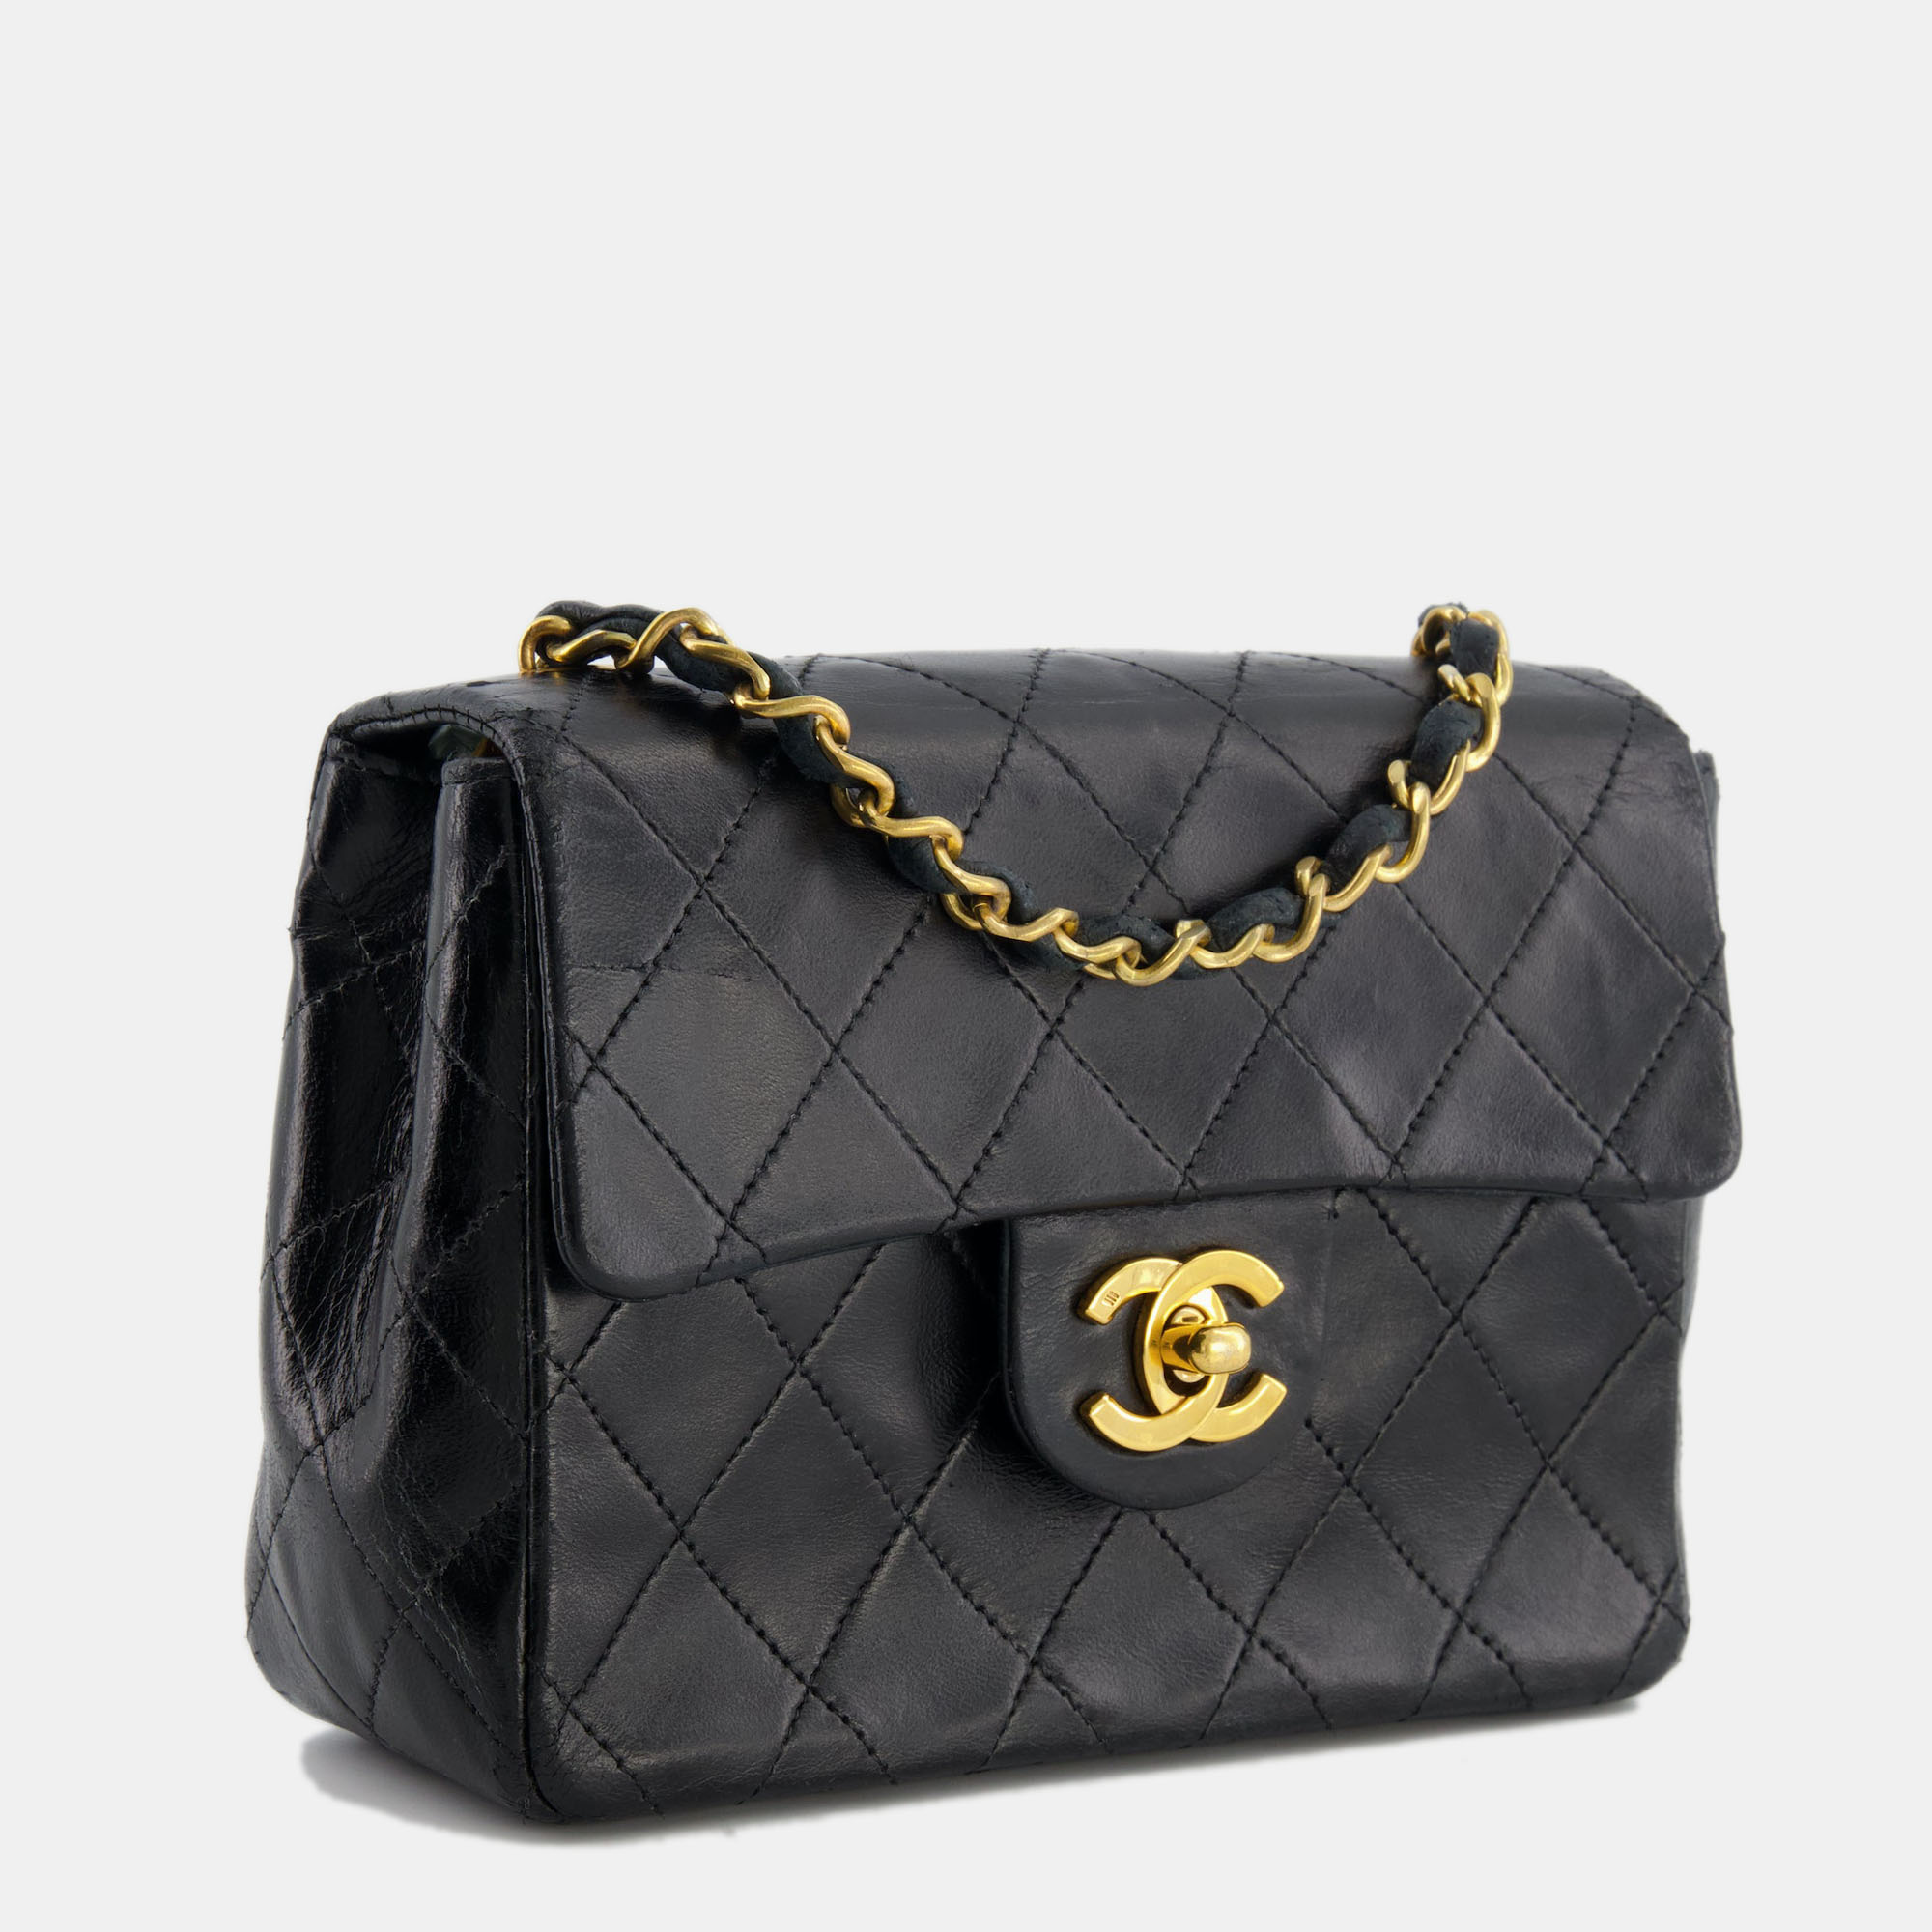 Chanel Vintage Black Mini Square Bag in Lambskin Leather with 24k Gold  Hardware Chanel